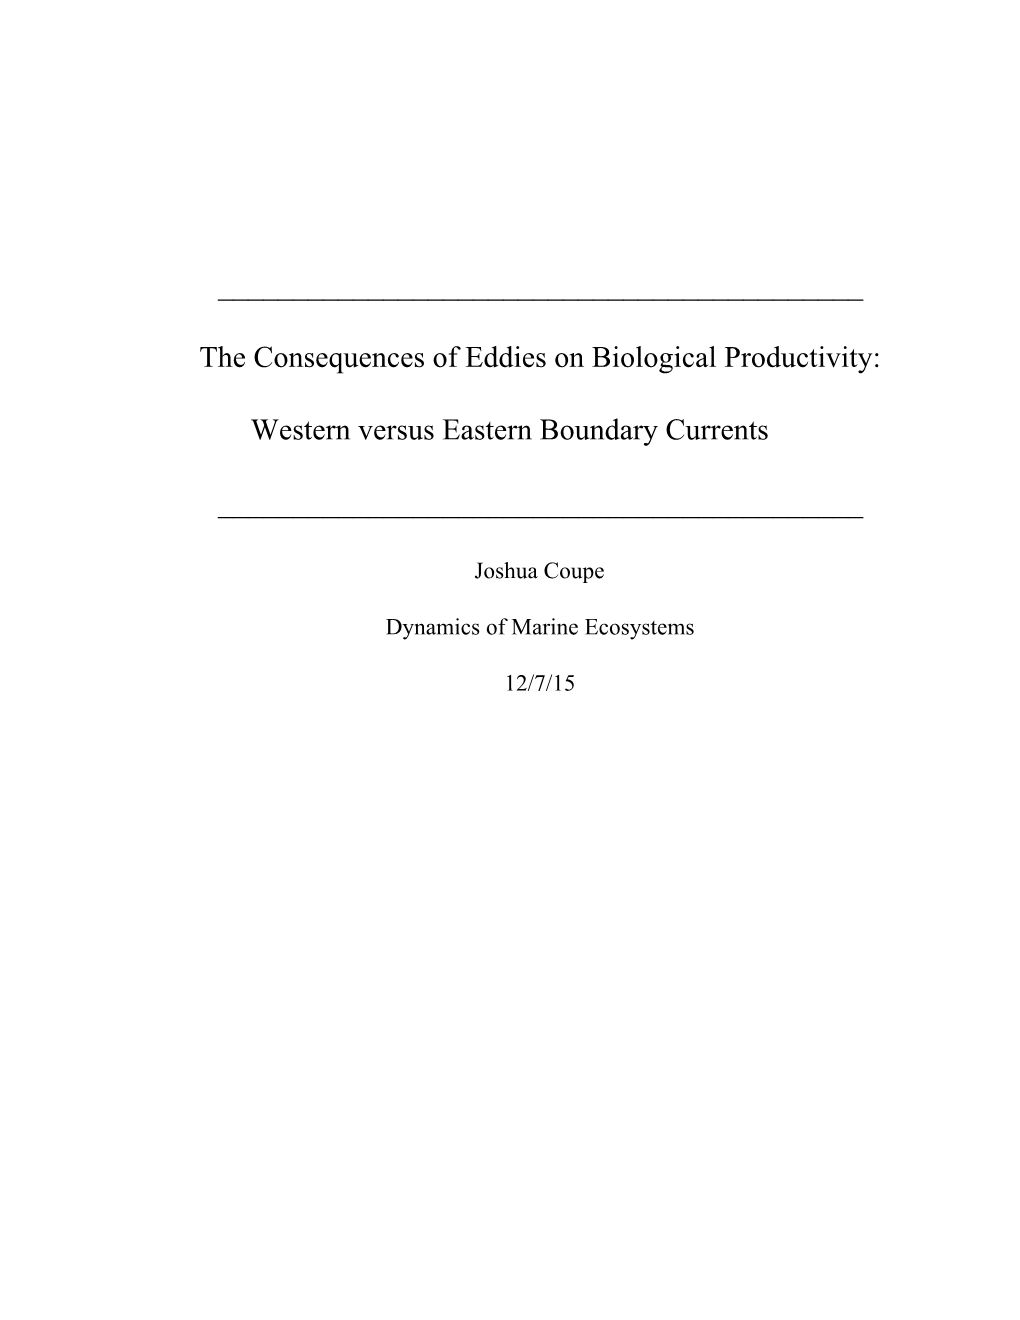 The Consequences of Eddies on Biological Productivity